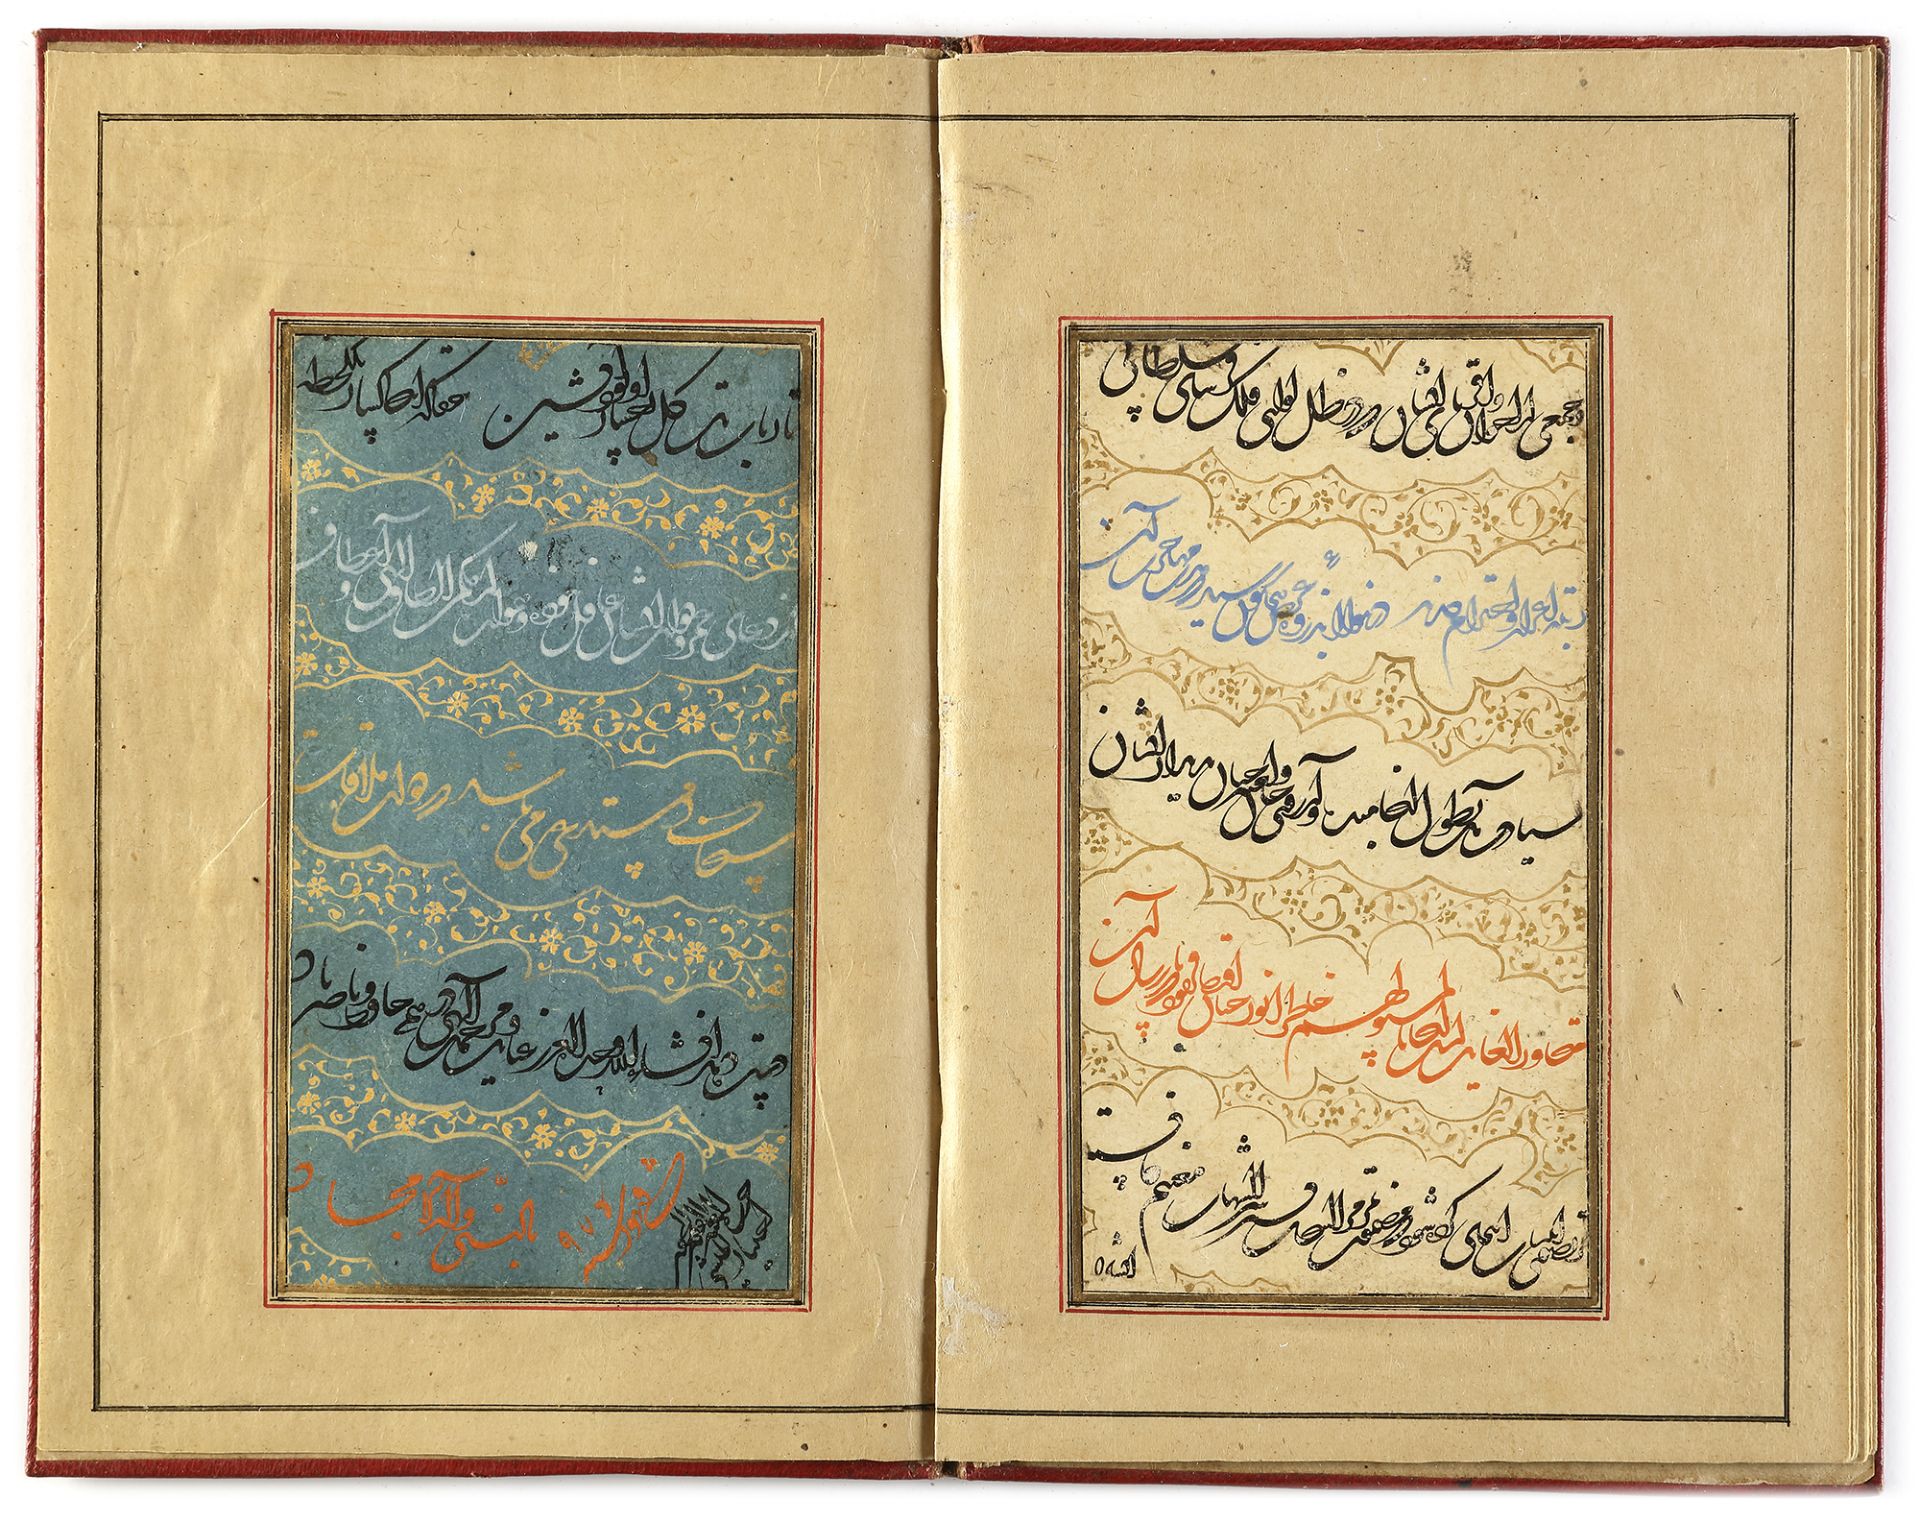 A MANUSCRIPT OF POETRY, SIGNED BY IKHTIYAR AL-MUNSHI, PERSIA, SAVAFID, DATED 975 AH/1567-68 AD - Image 11 of 18